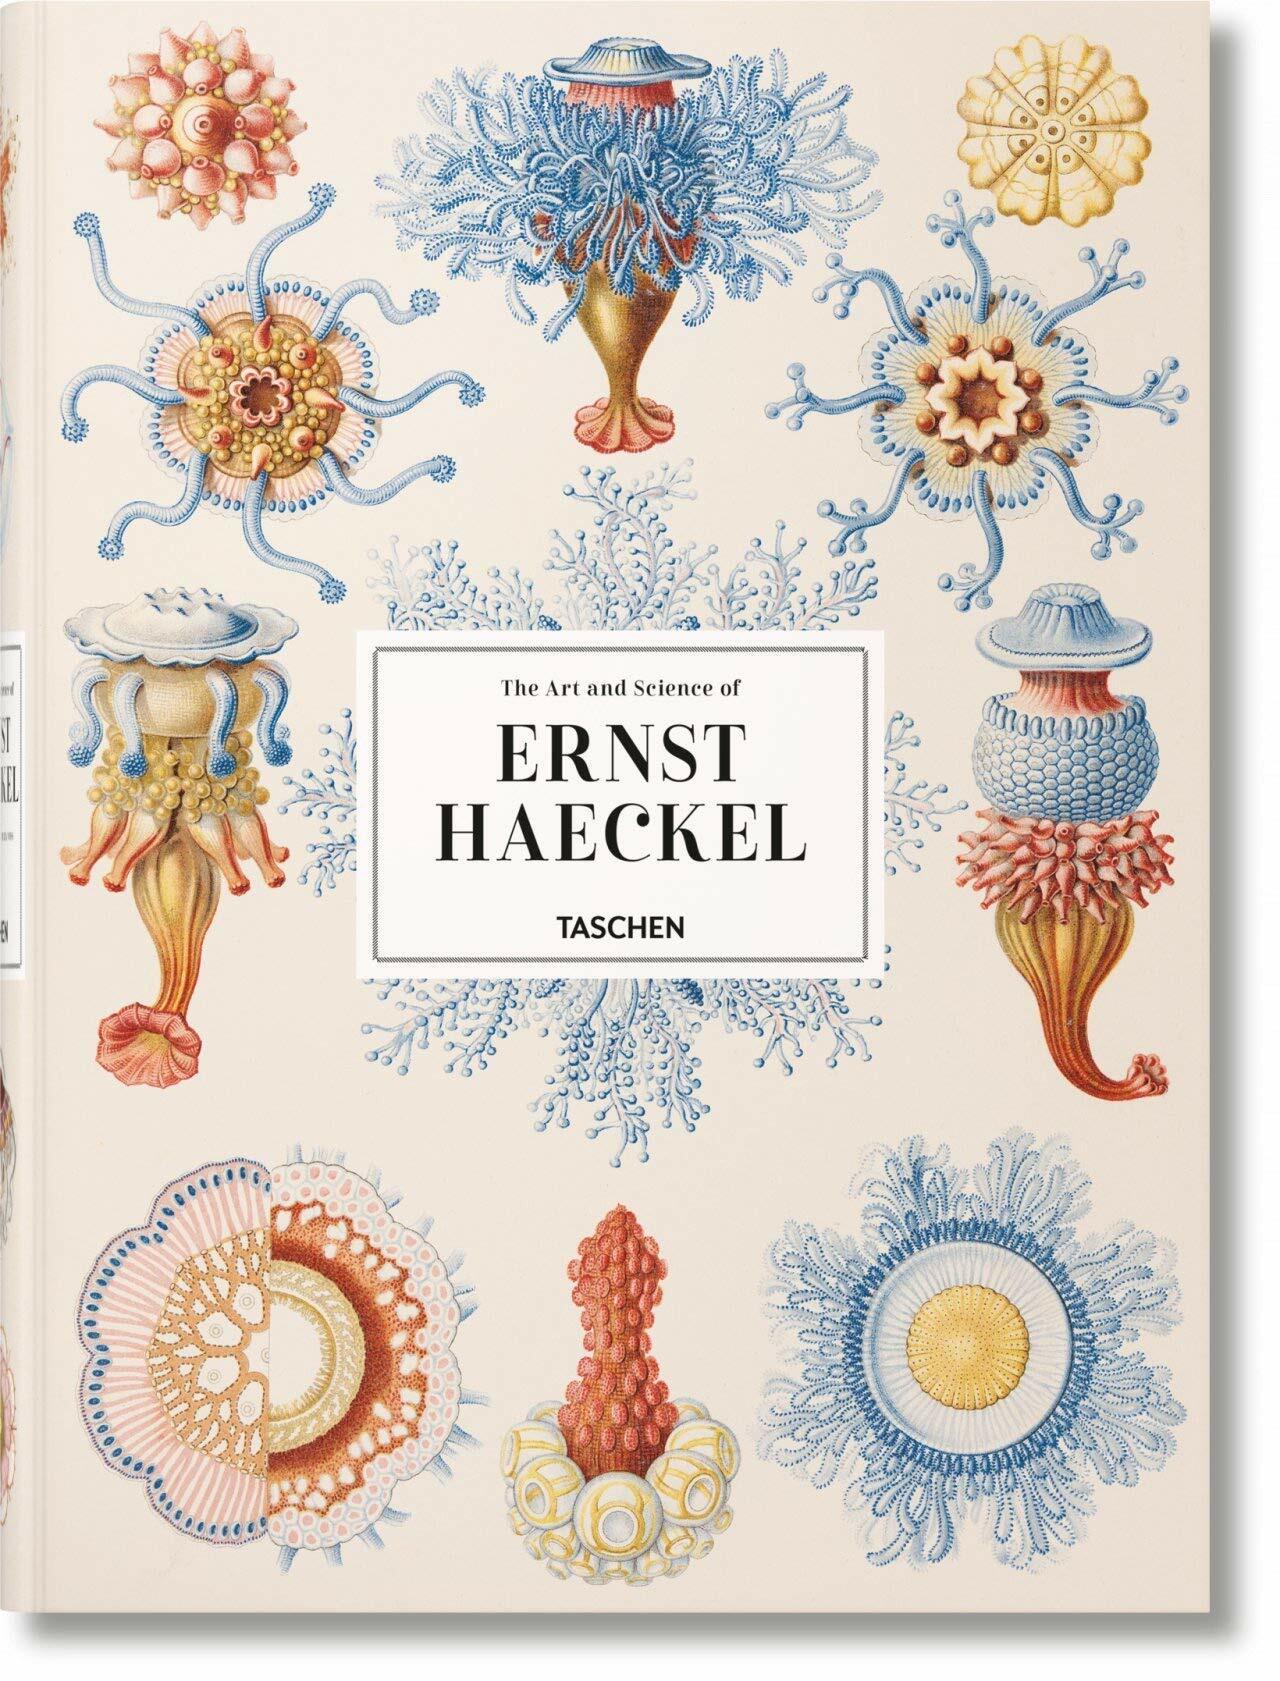 The Art and Science of Ernst Haeckel (Hardcover)